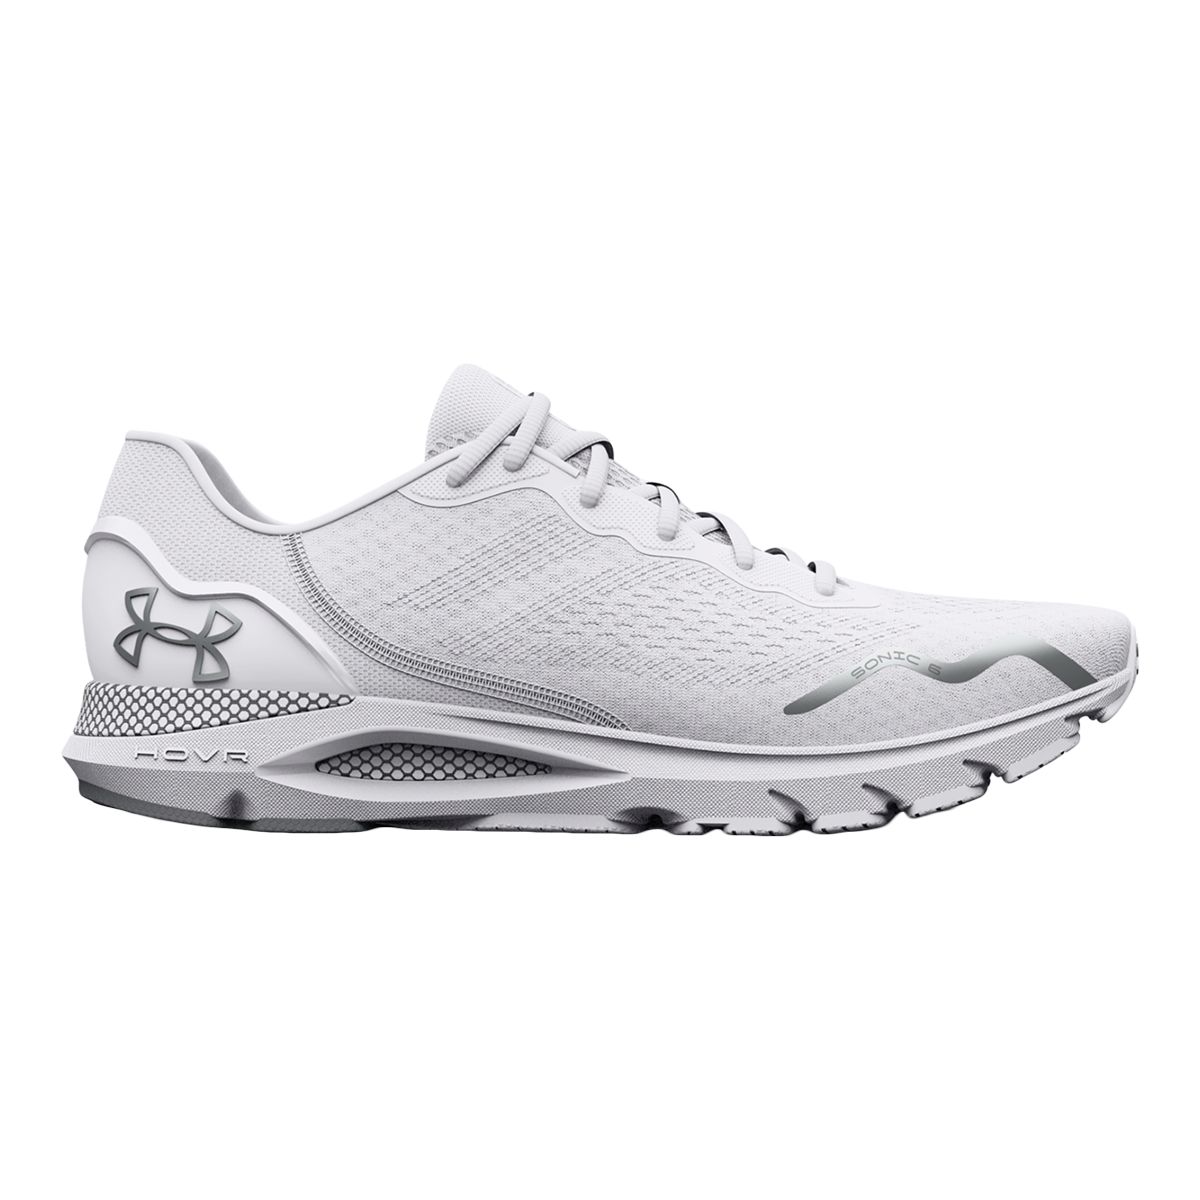 Under Armour Men's Hovr Sonic 6 Running Shoes